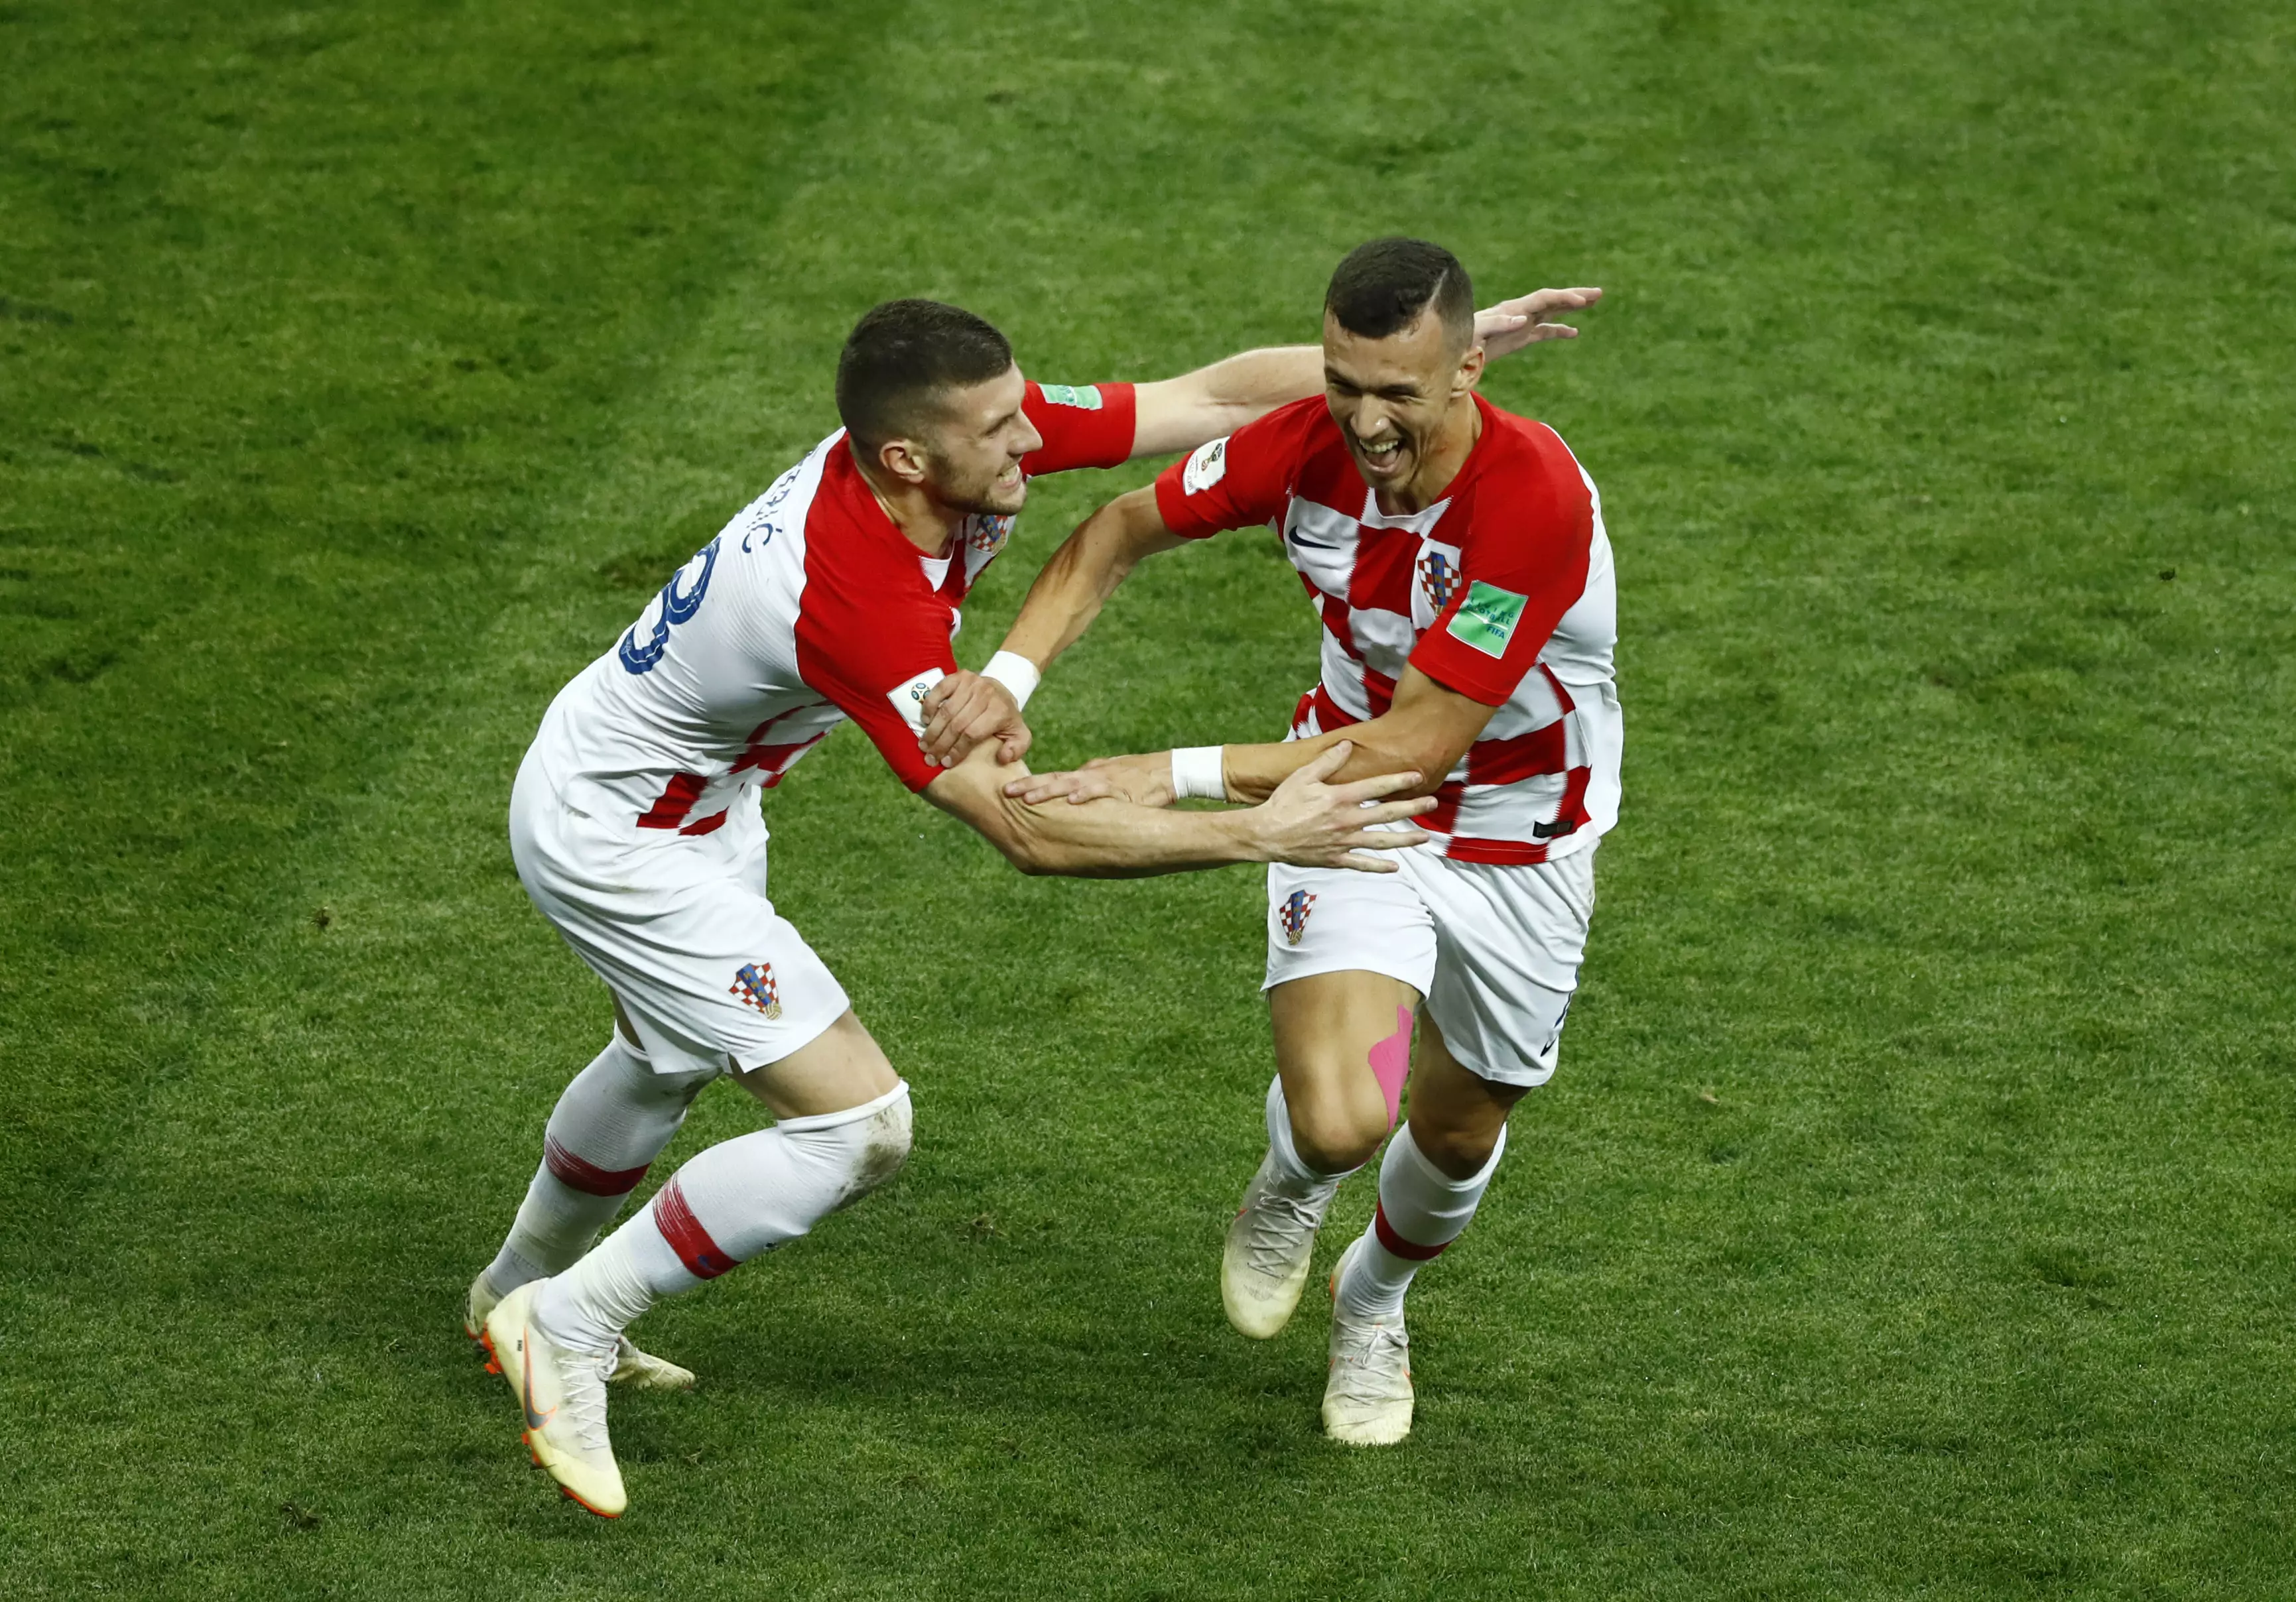 Perisic and Rebic celebrate Croatia equalising in the World Cup final. Image: PA Images